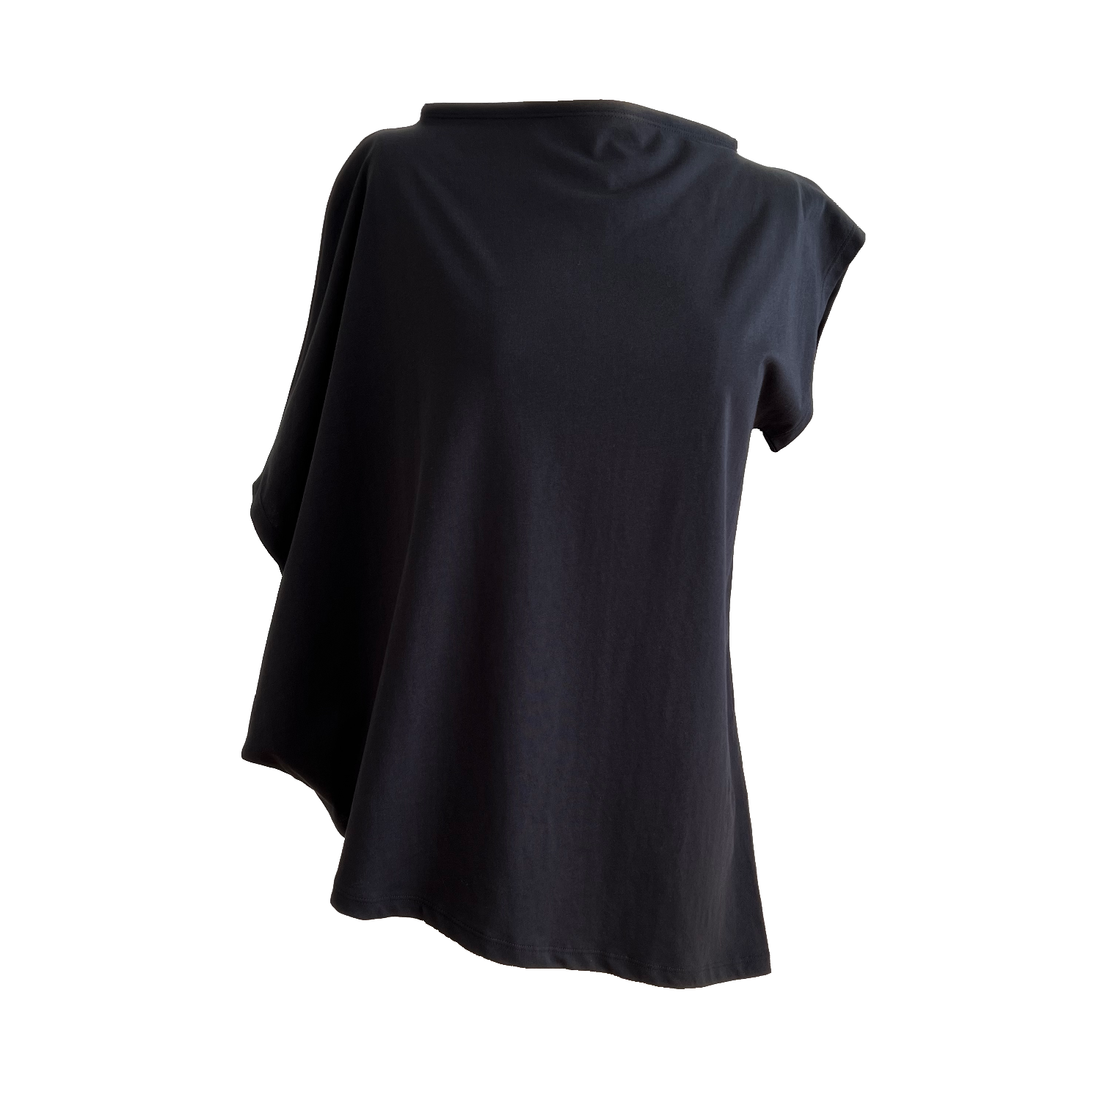 An image of a asymmetrical t-shirt in organic cotton. Oversized by Malaika New York